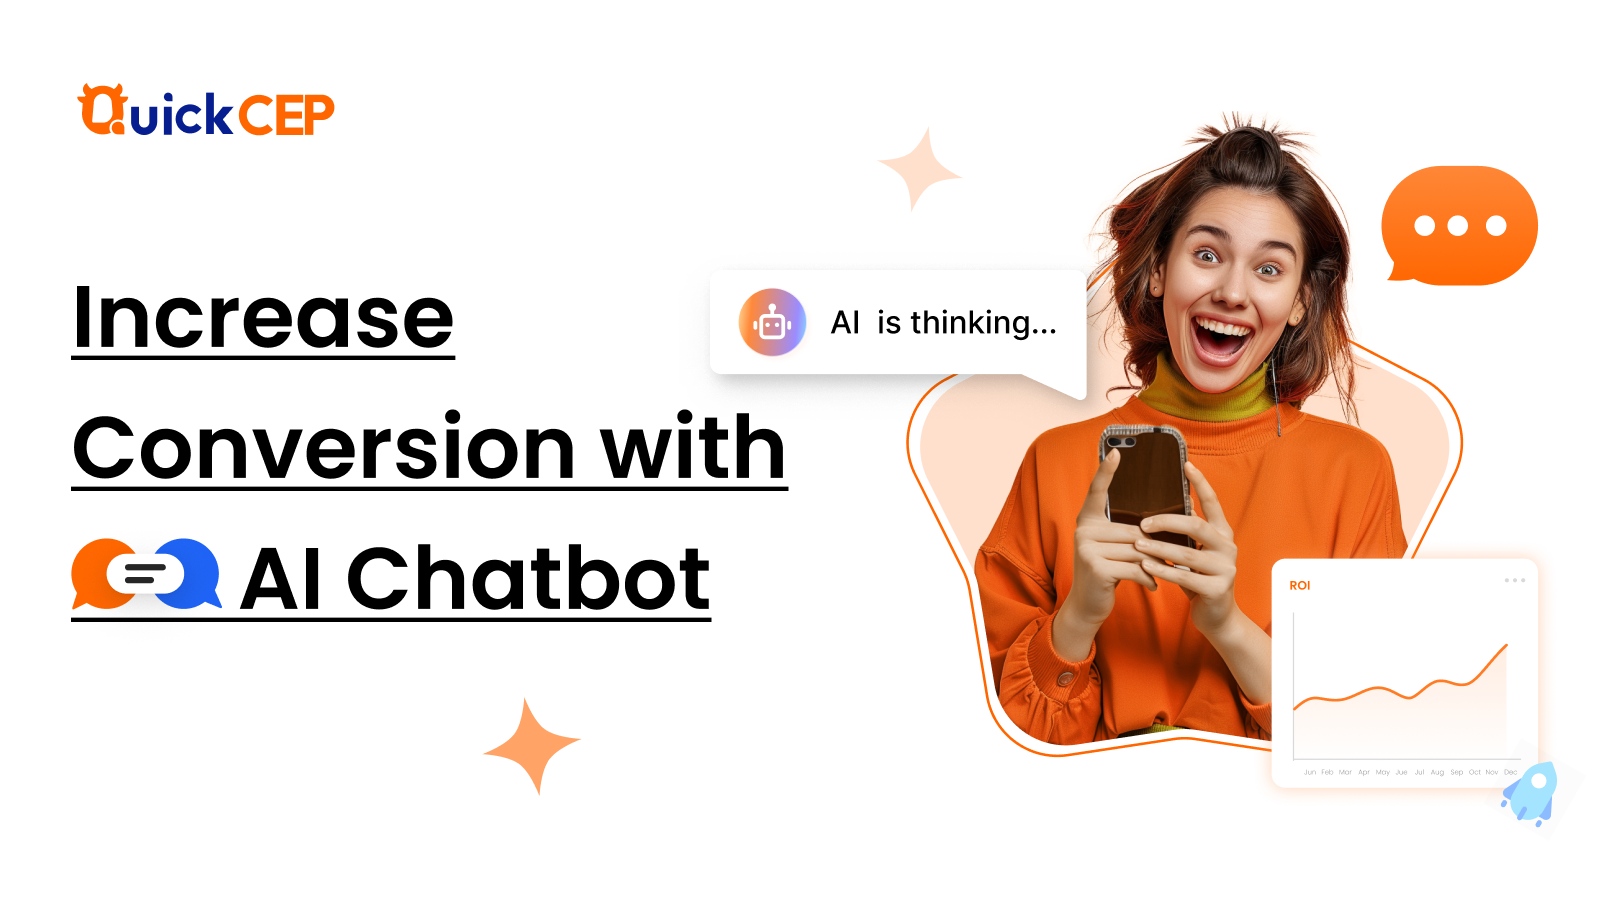 Increase conversion with AI Chatbots